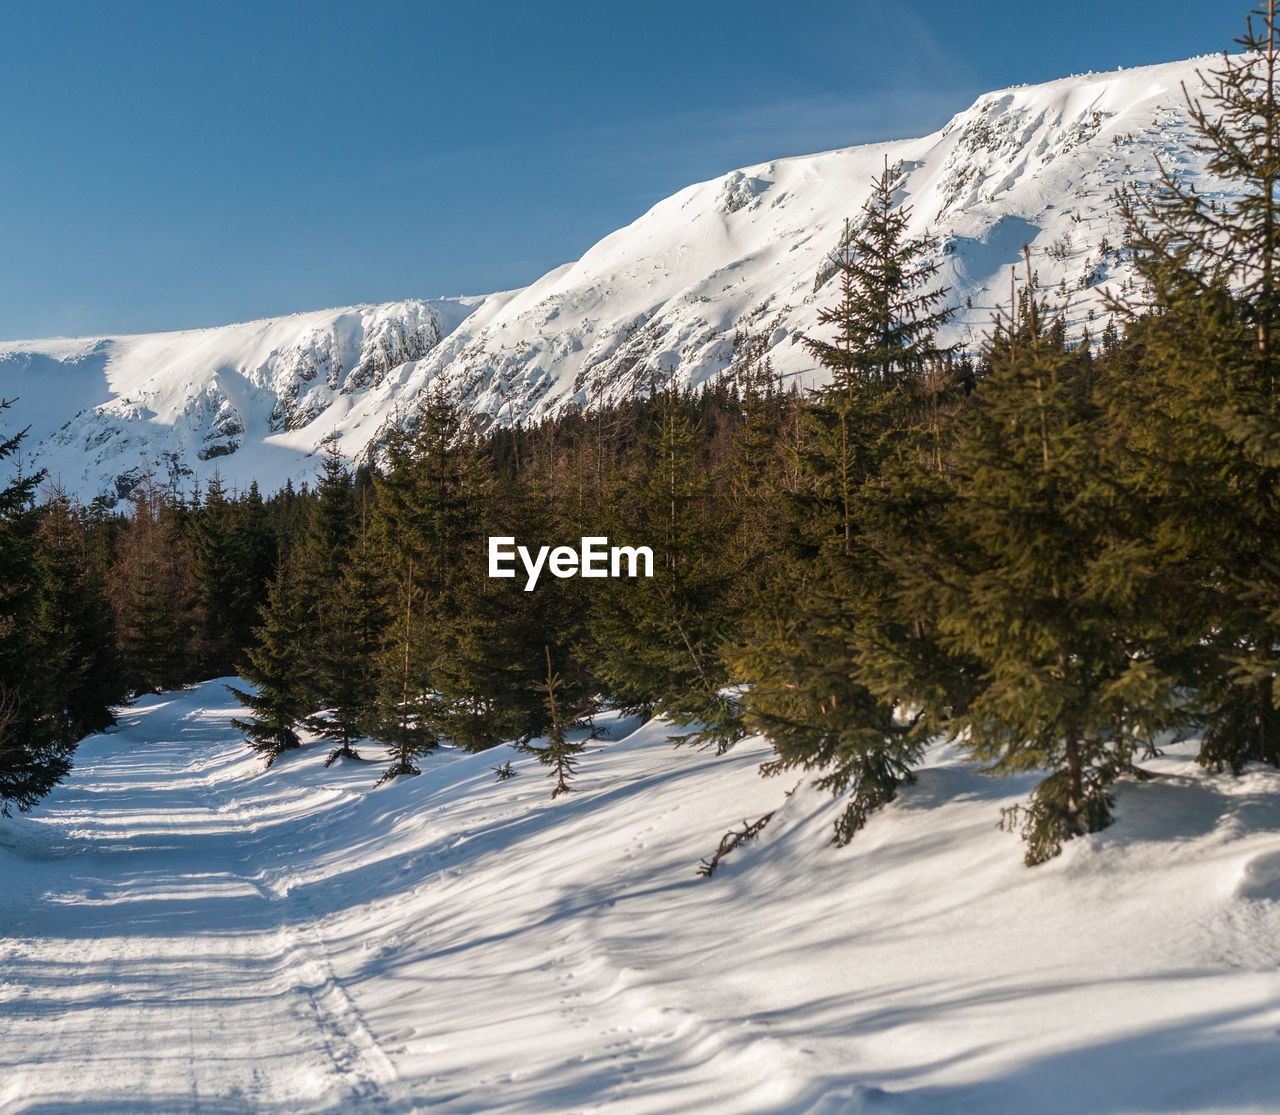 Trees on snow covered mountains against sky